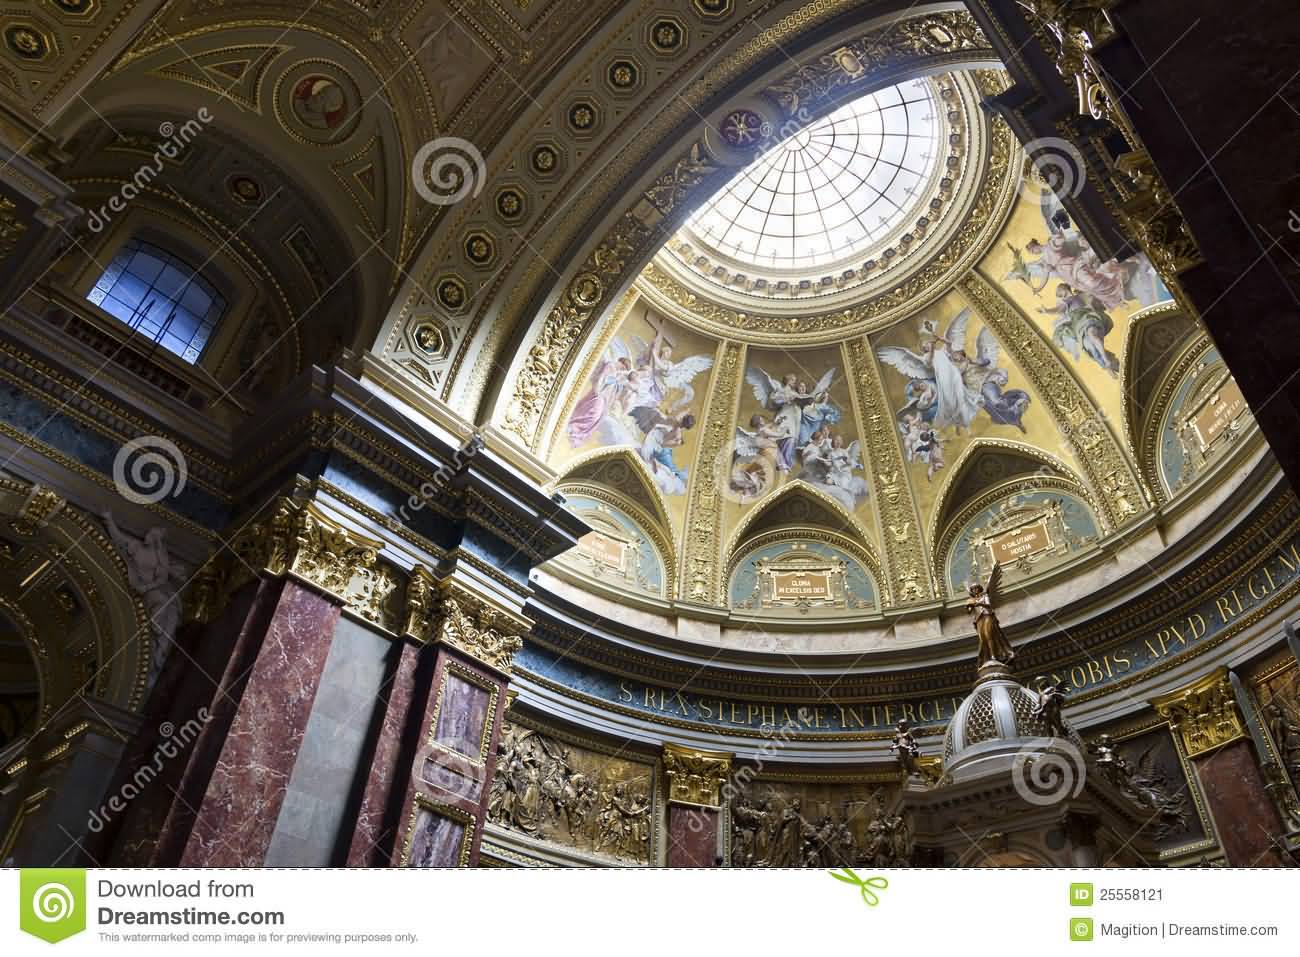 Incredible Inside View Of The St. Stephen's Basilica